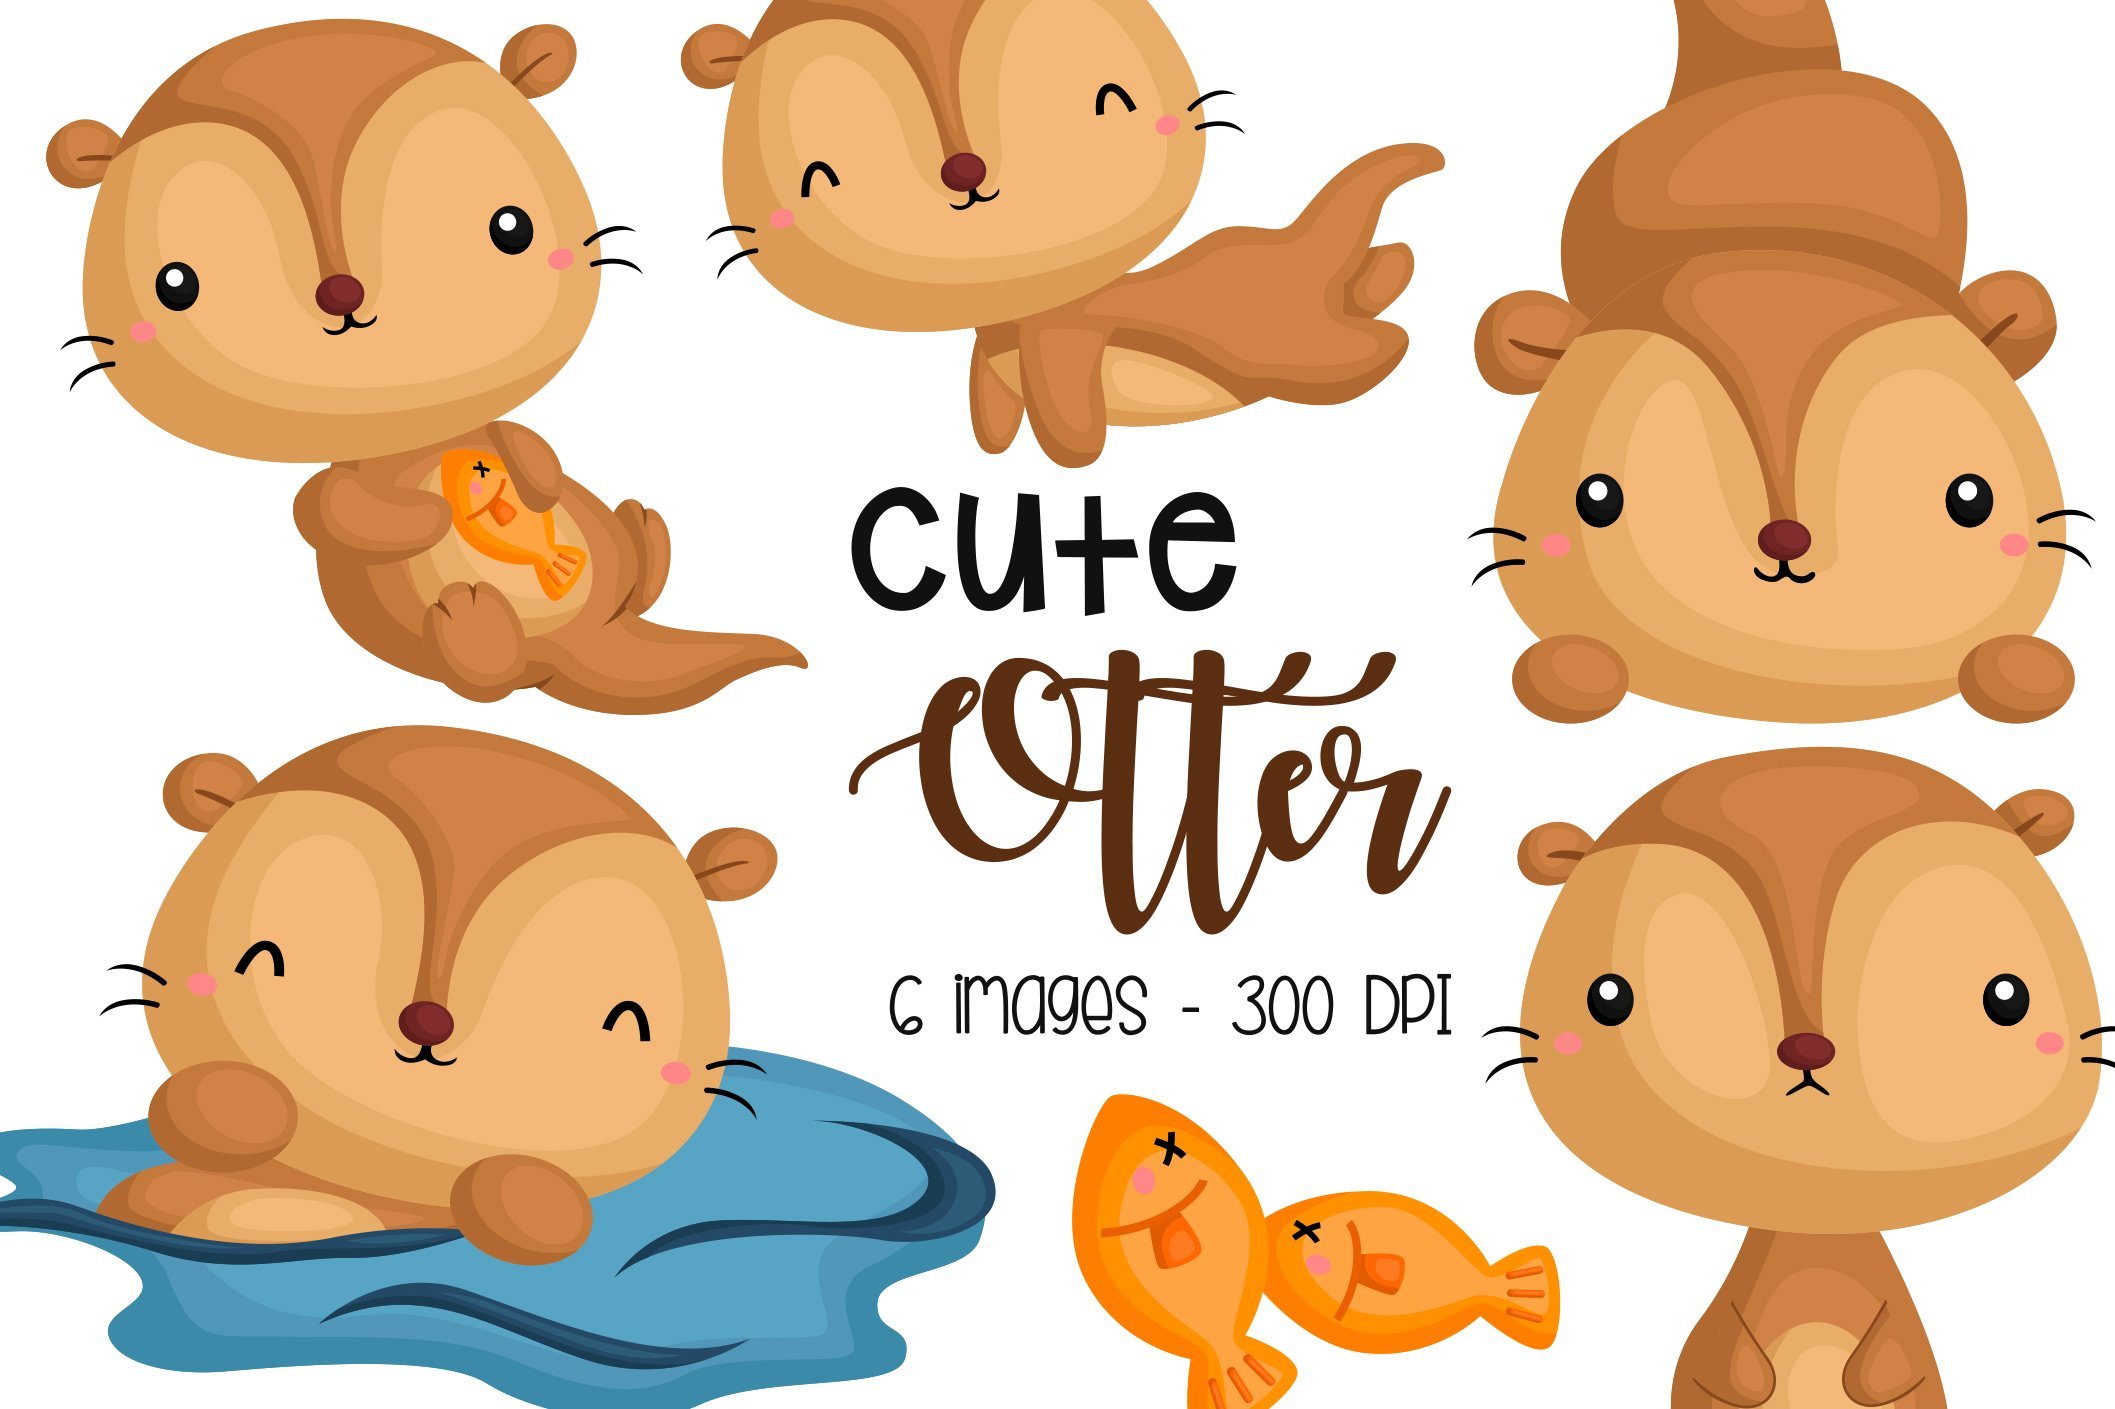 Cute Otter Animal Clipart cover image.